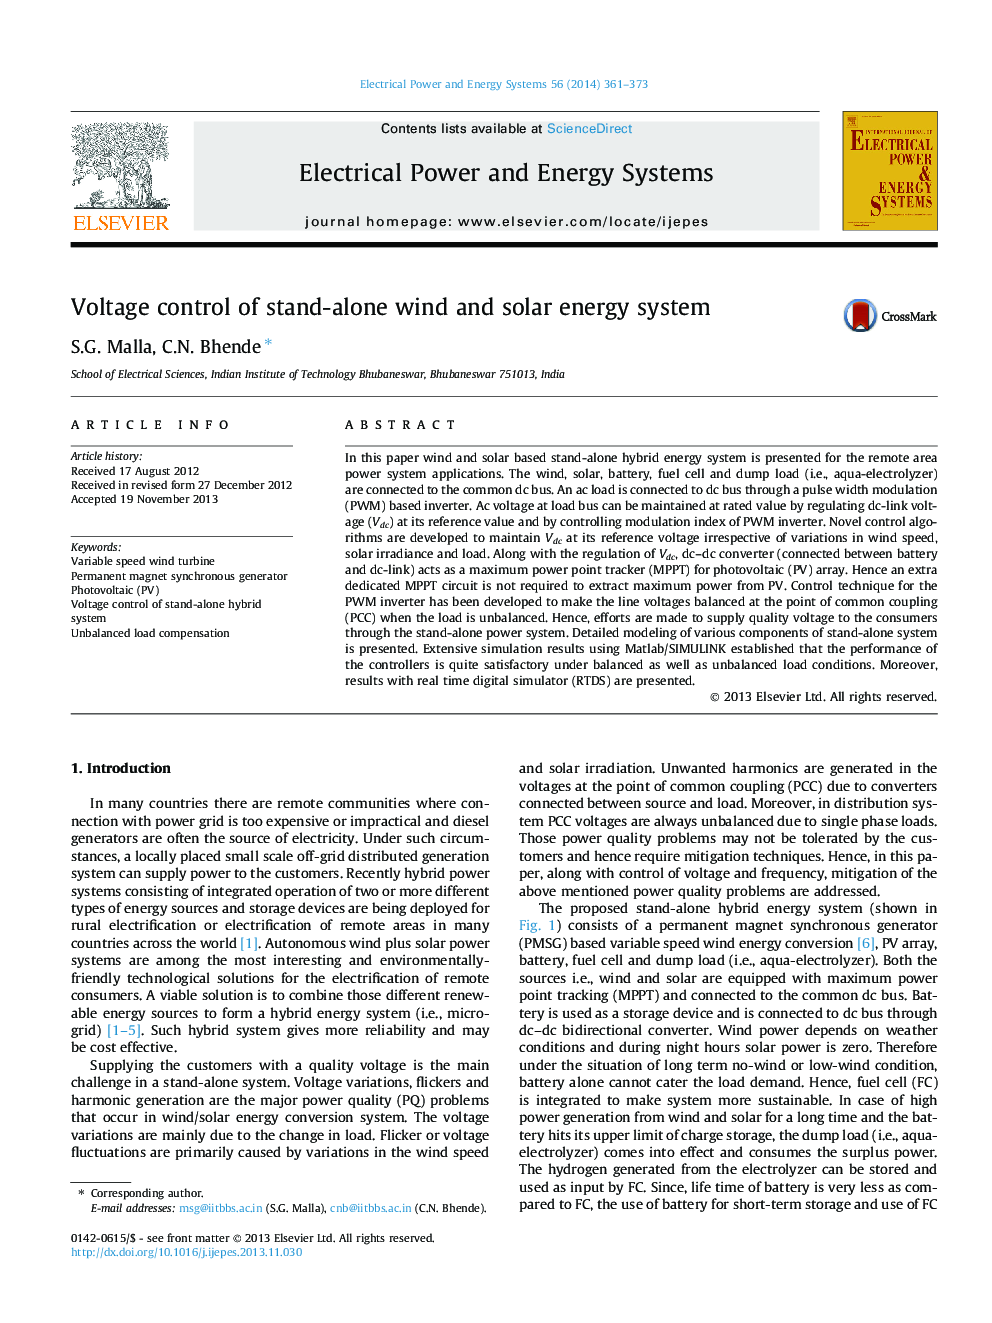 Voltage control of stand-alone wind and solar energy system